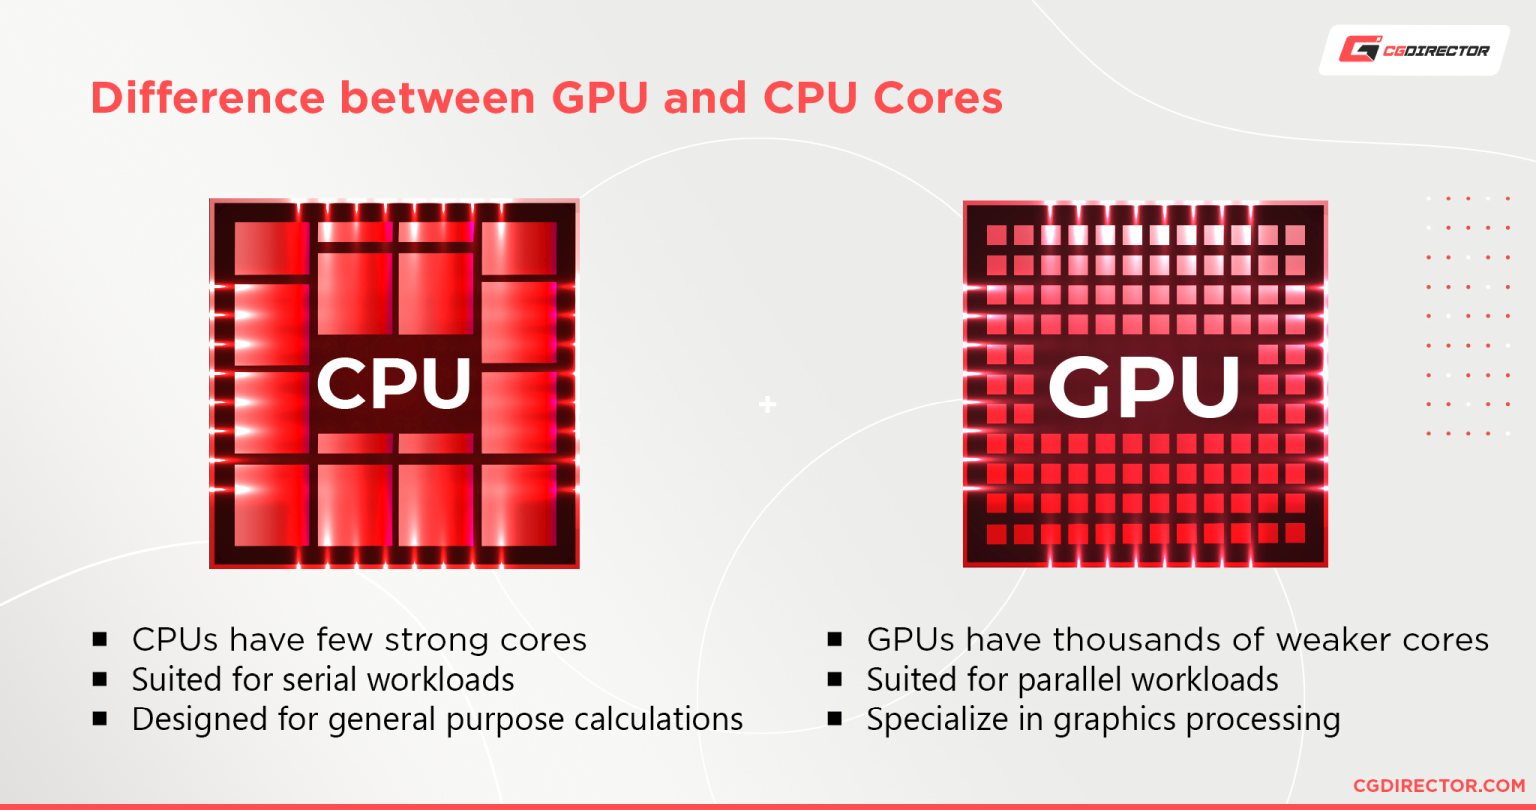 Differences between GPU and CPU cores